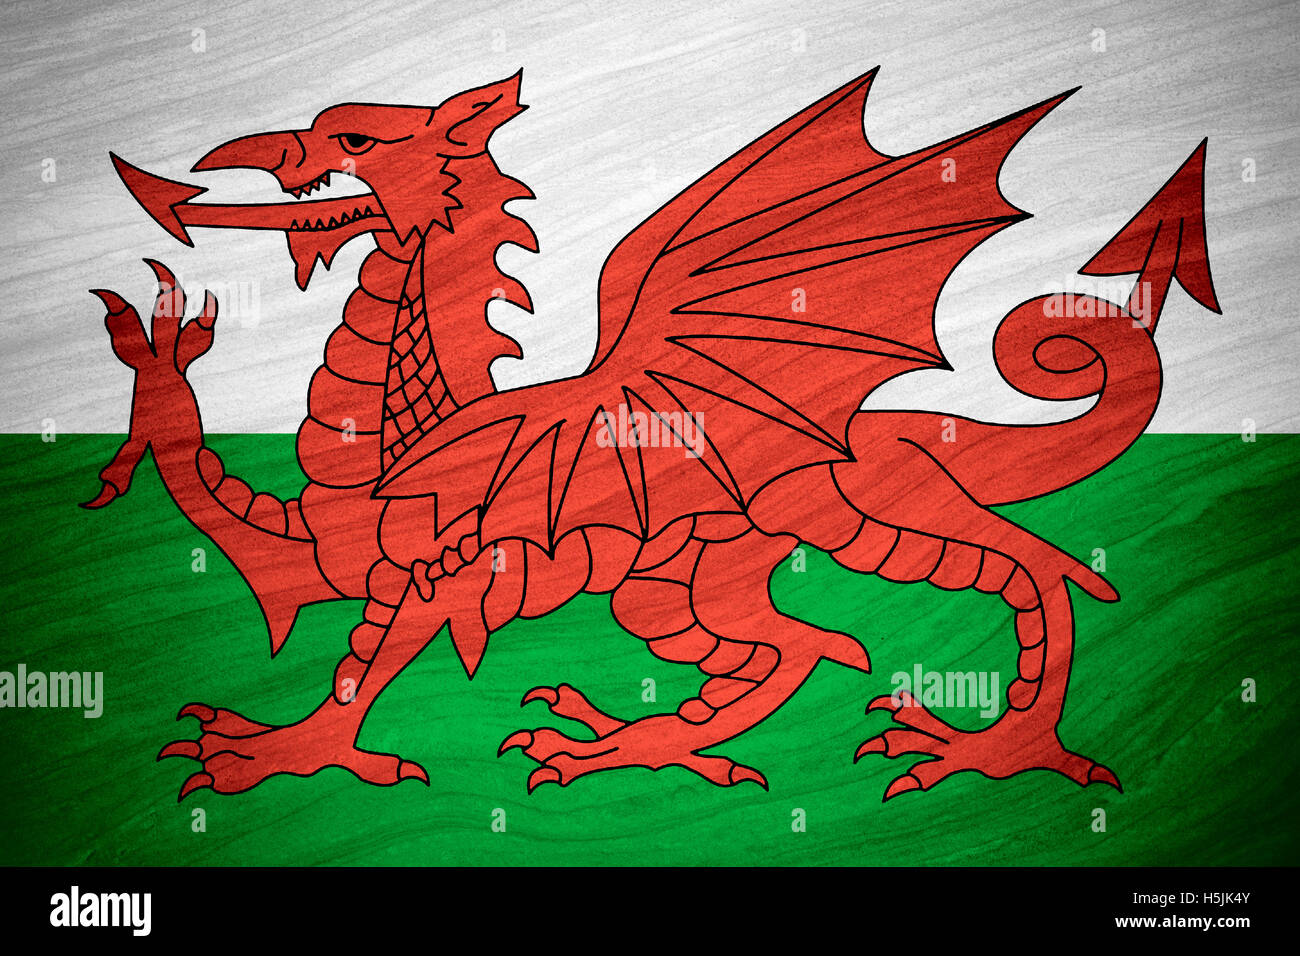 flag of Wales or Welsh banner on abstract background Stock Photo